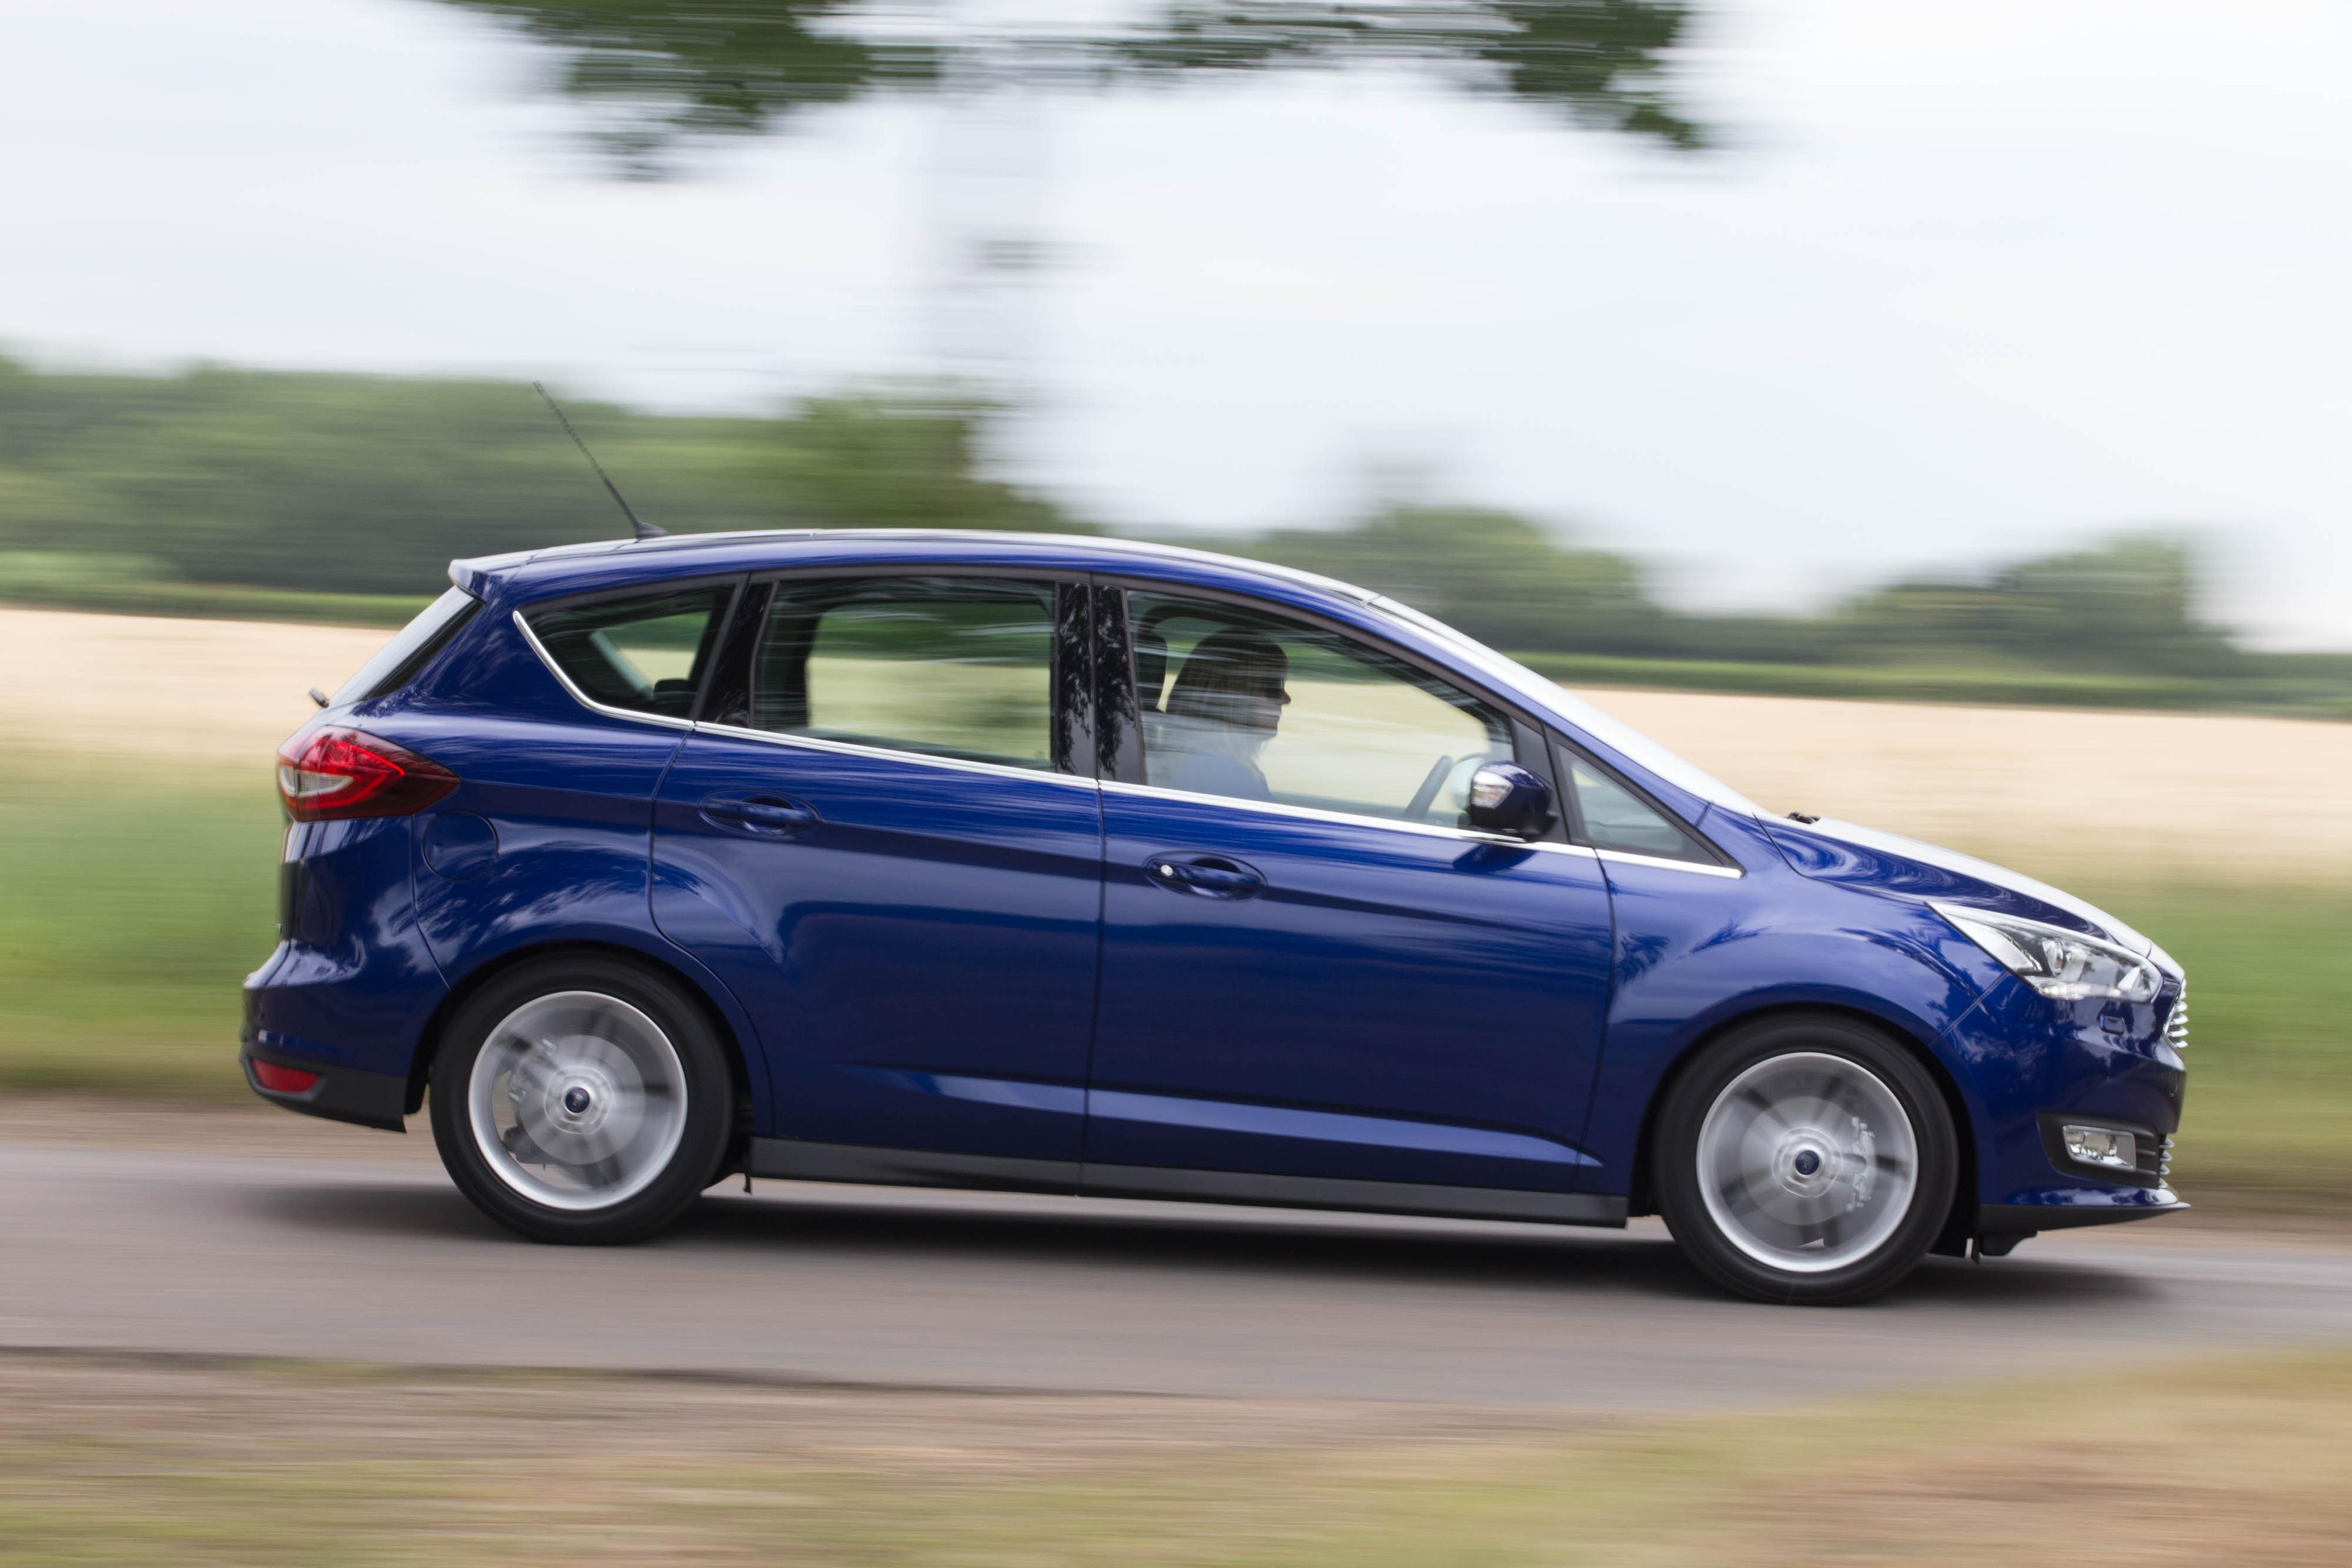 A side view of a blue Ford C-Max